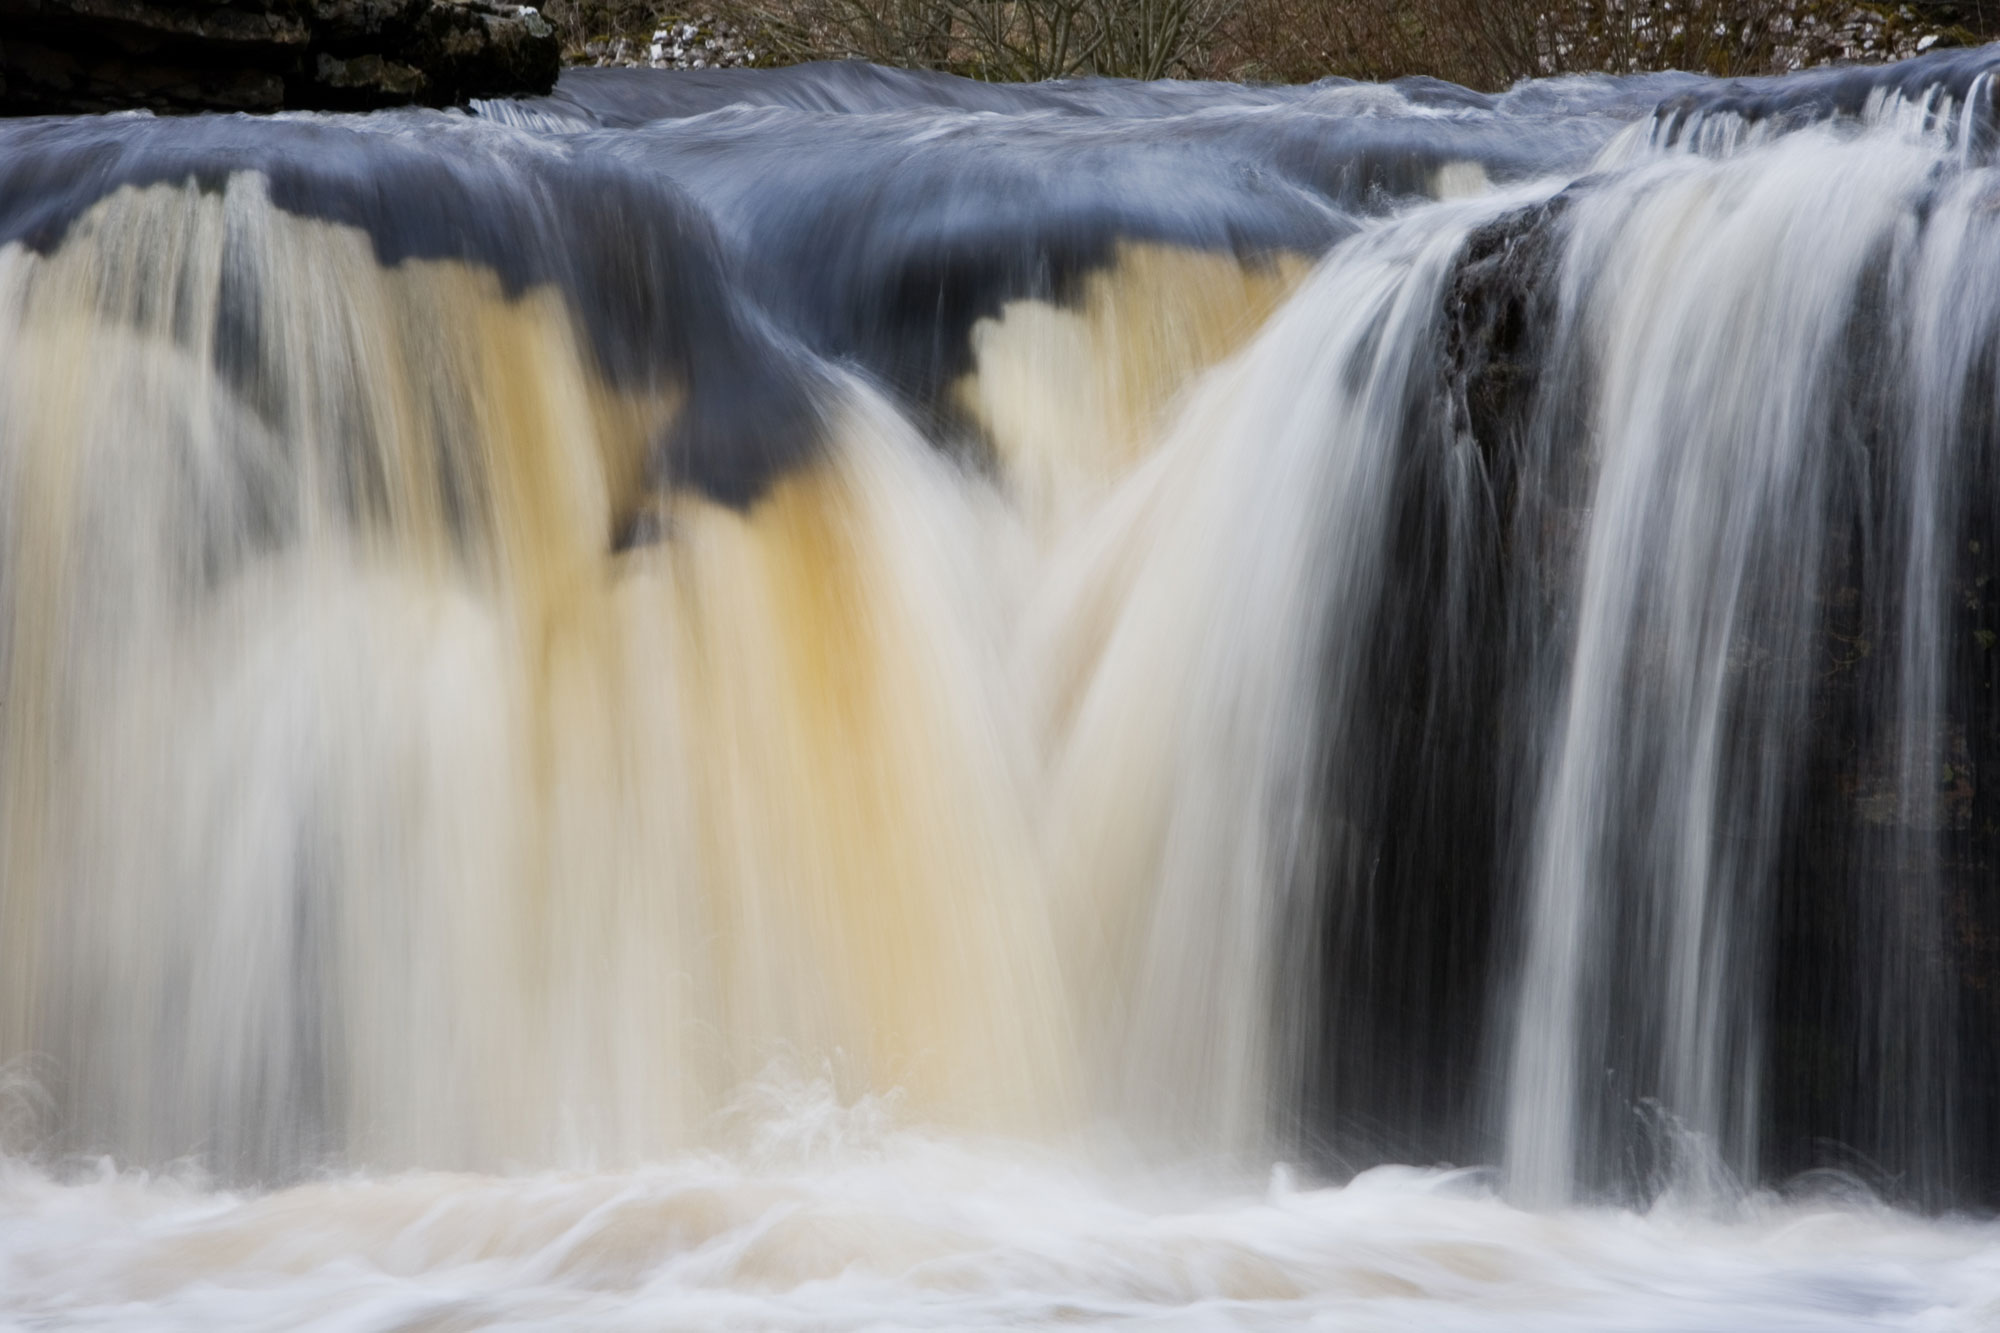 You'll find waterfalls everywhere; this one is in Keld, Yorkshire